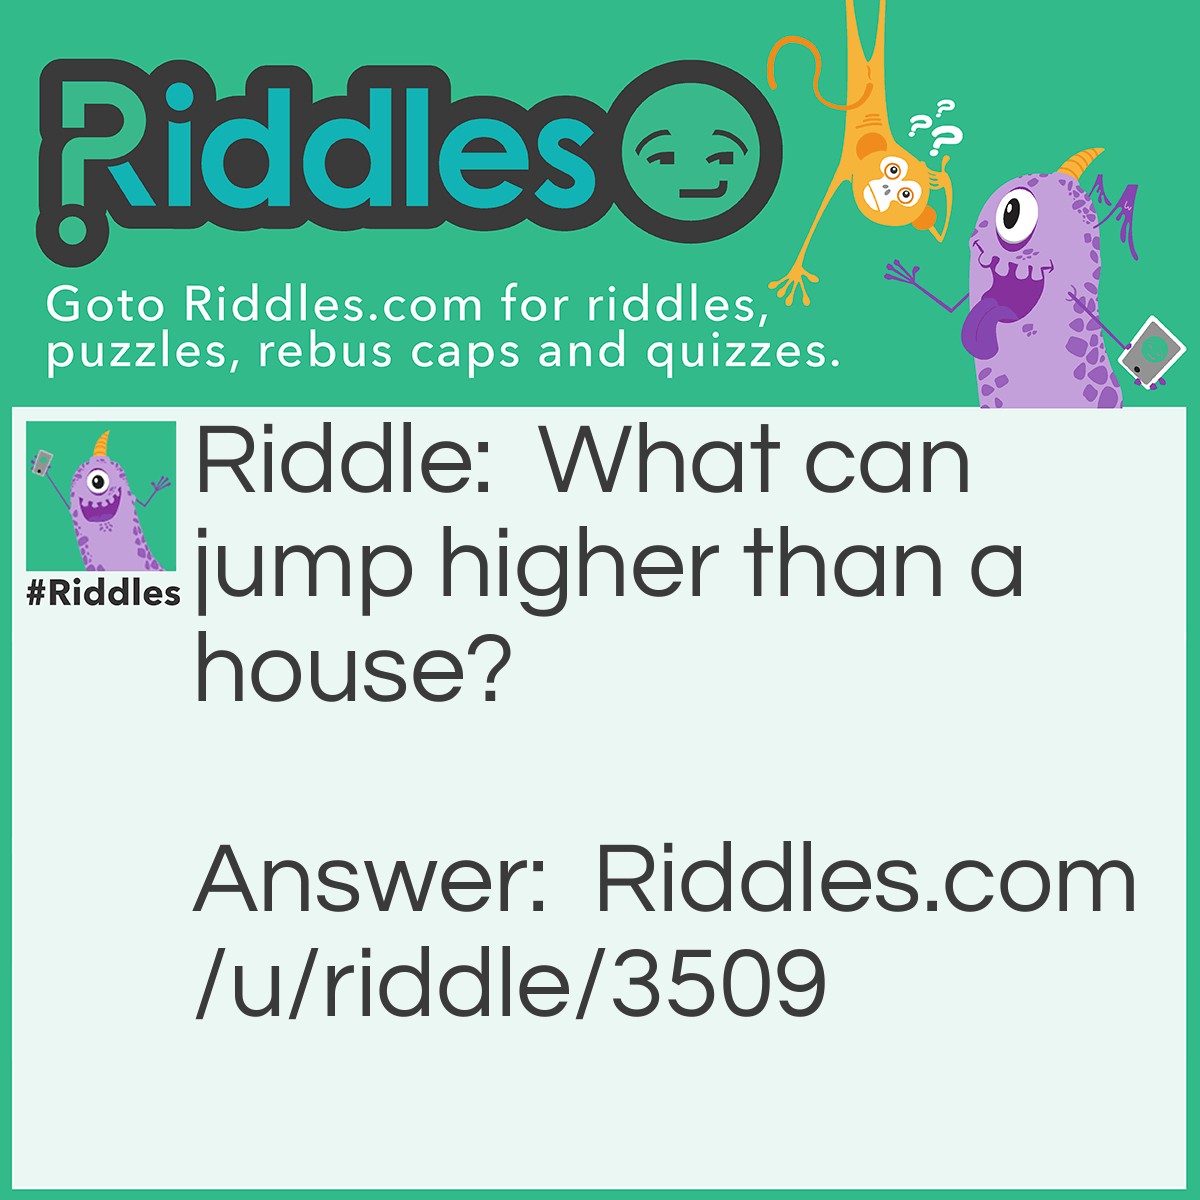 Riddle: What can jump higher than a house? Answer: Anything. Houses can't jump.